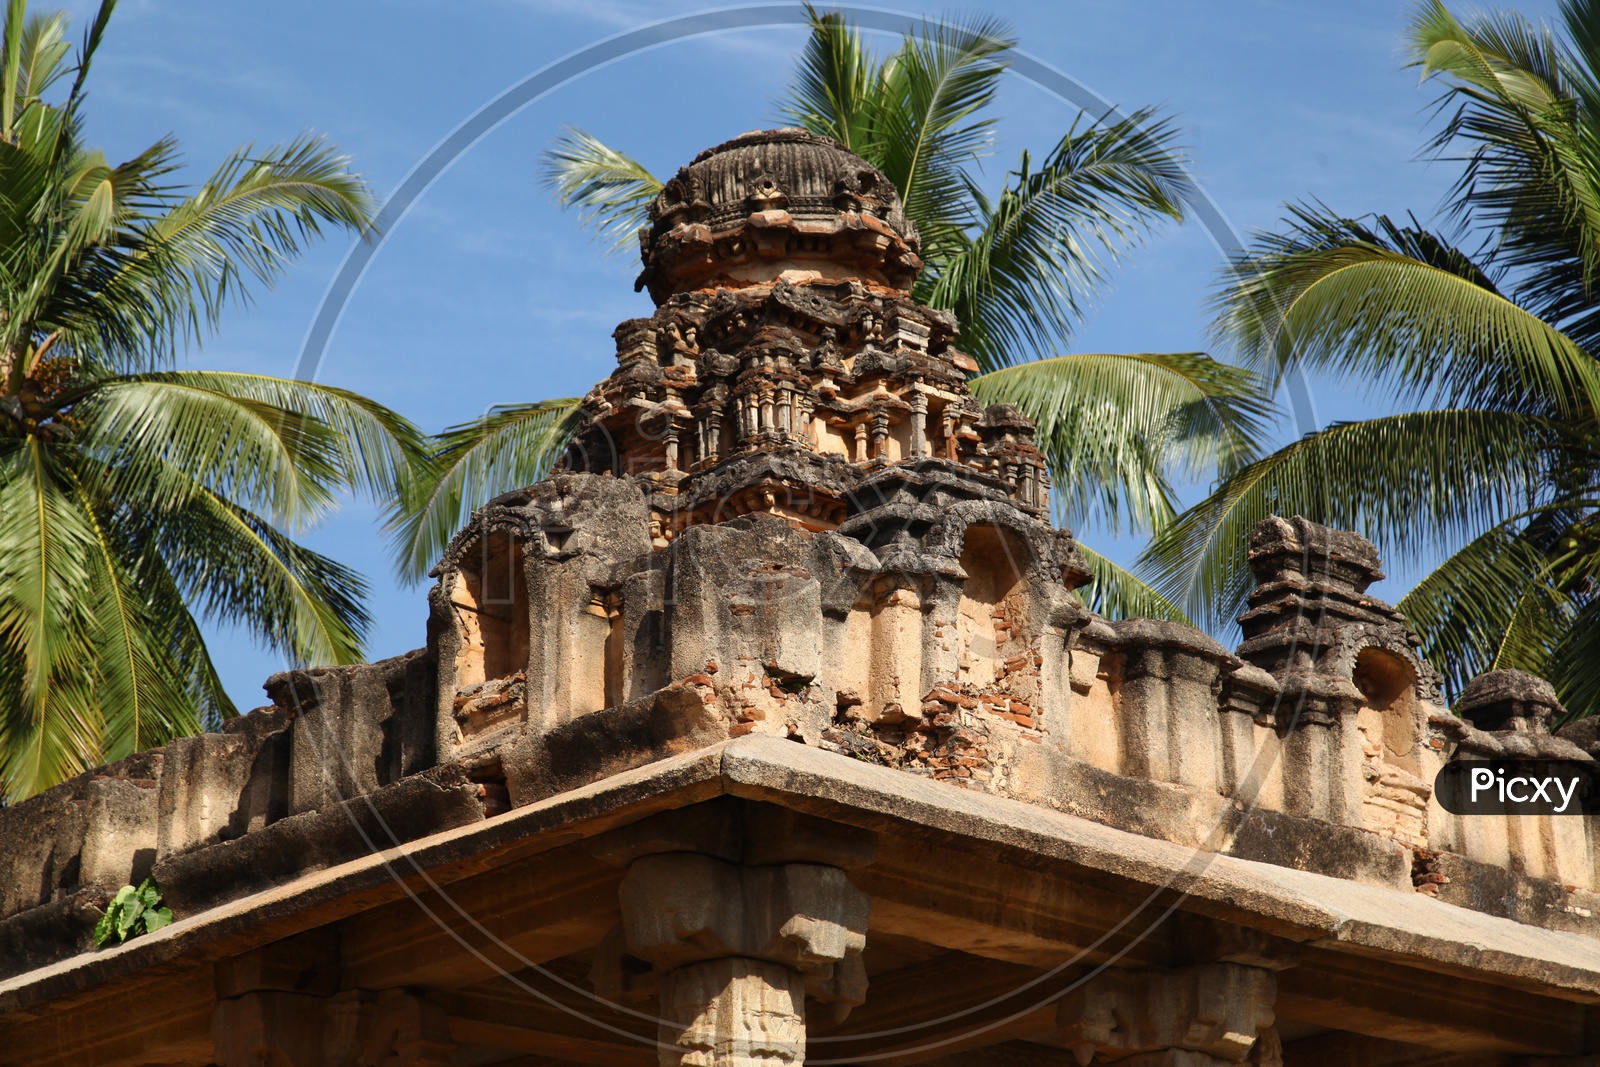 Architecture of the Vittala temple